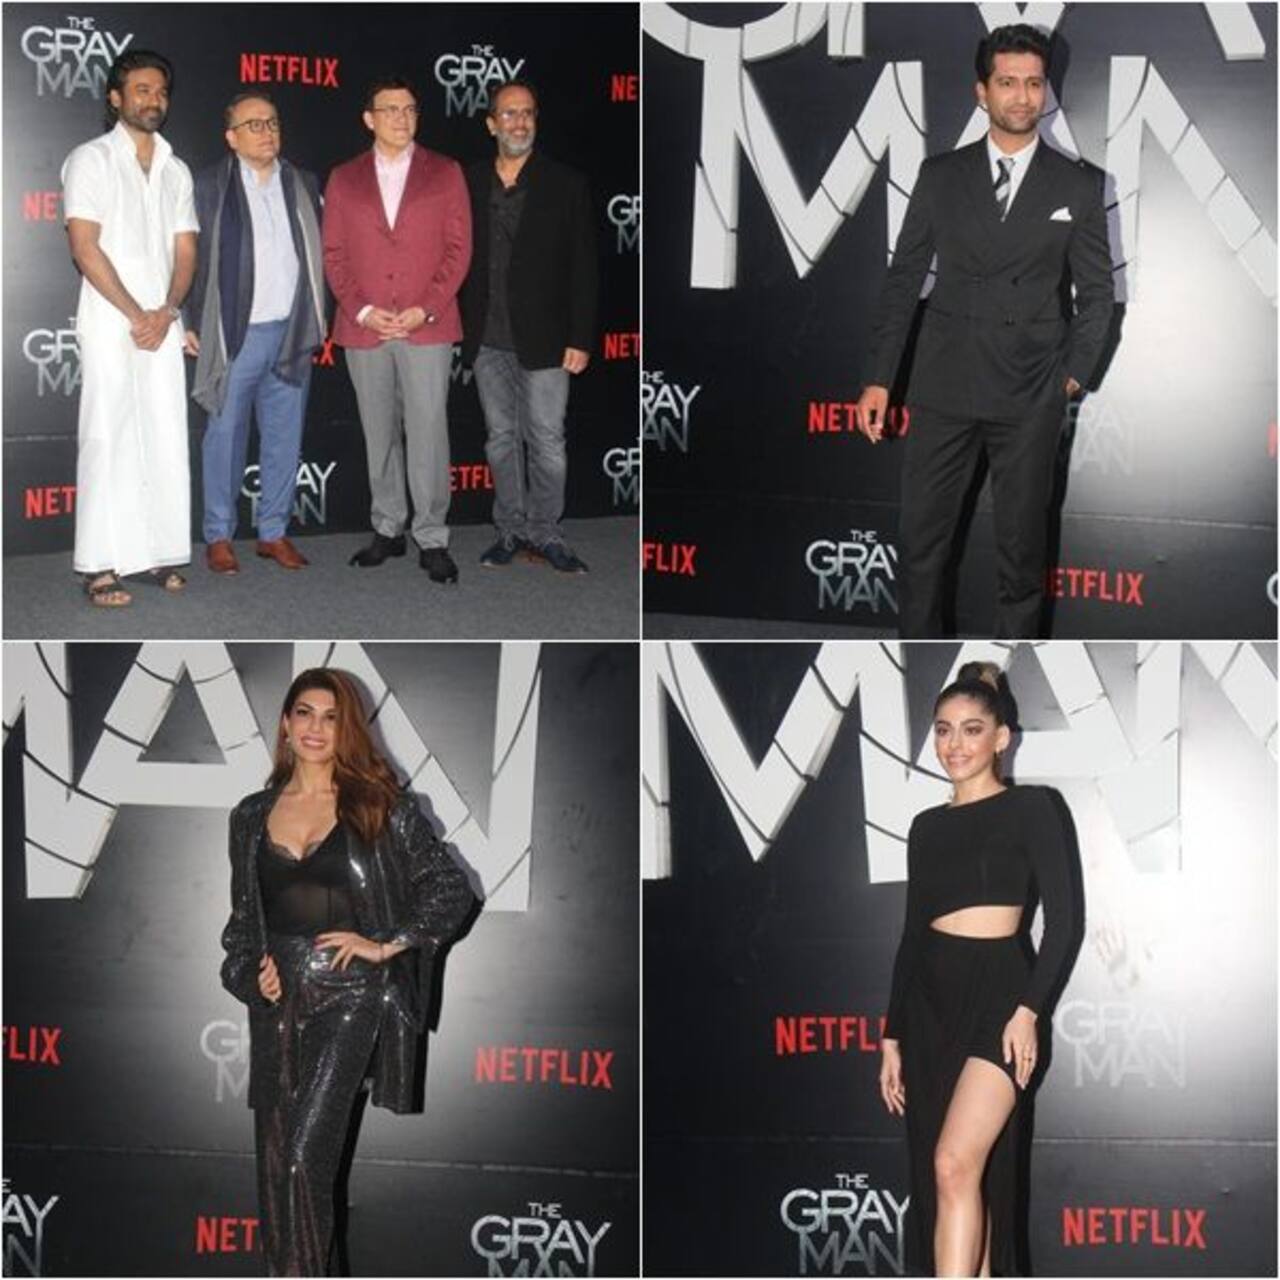 Bollywood celebs galore at The Gray Man red carpet premiere